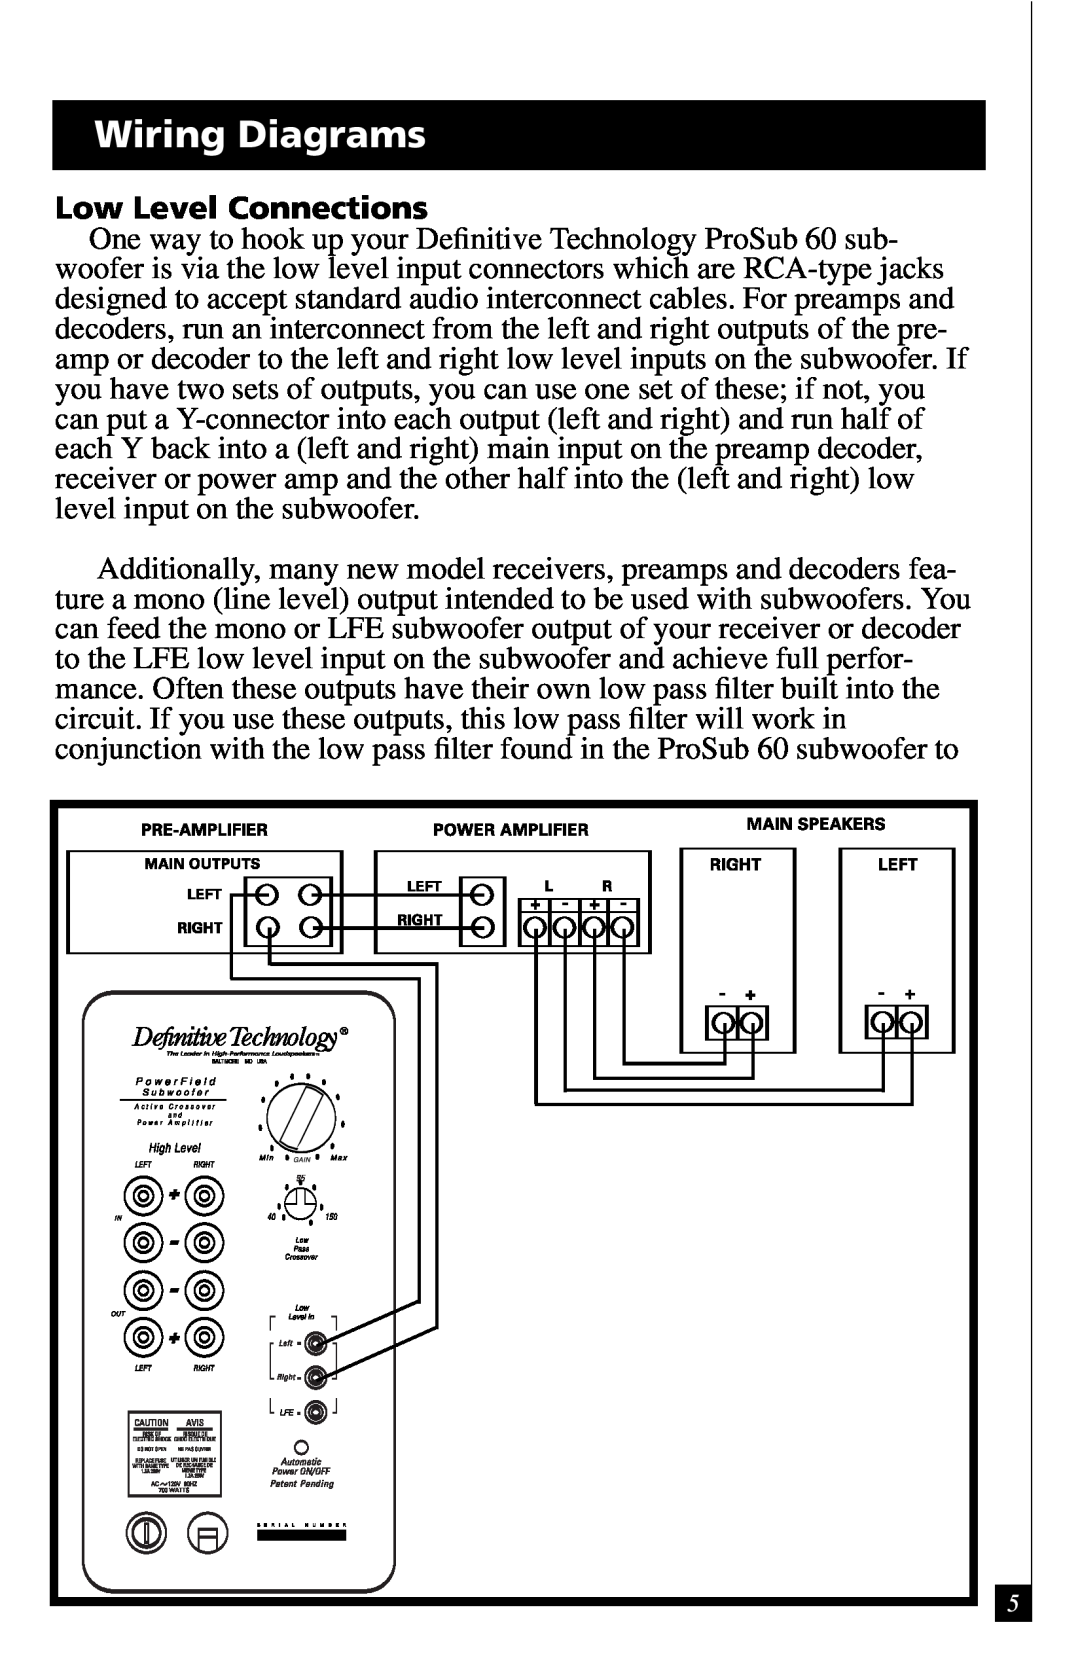 Definitive Technology 60 owner manual Wiring Diagrams, Low Level Connections 